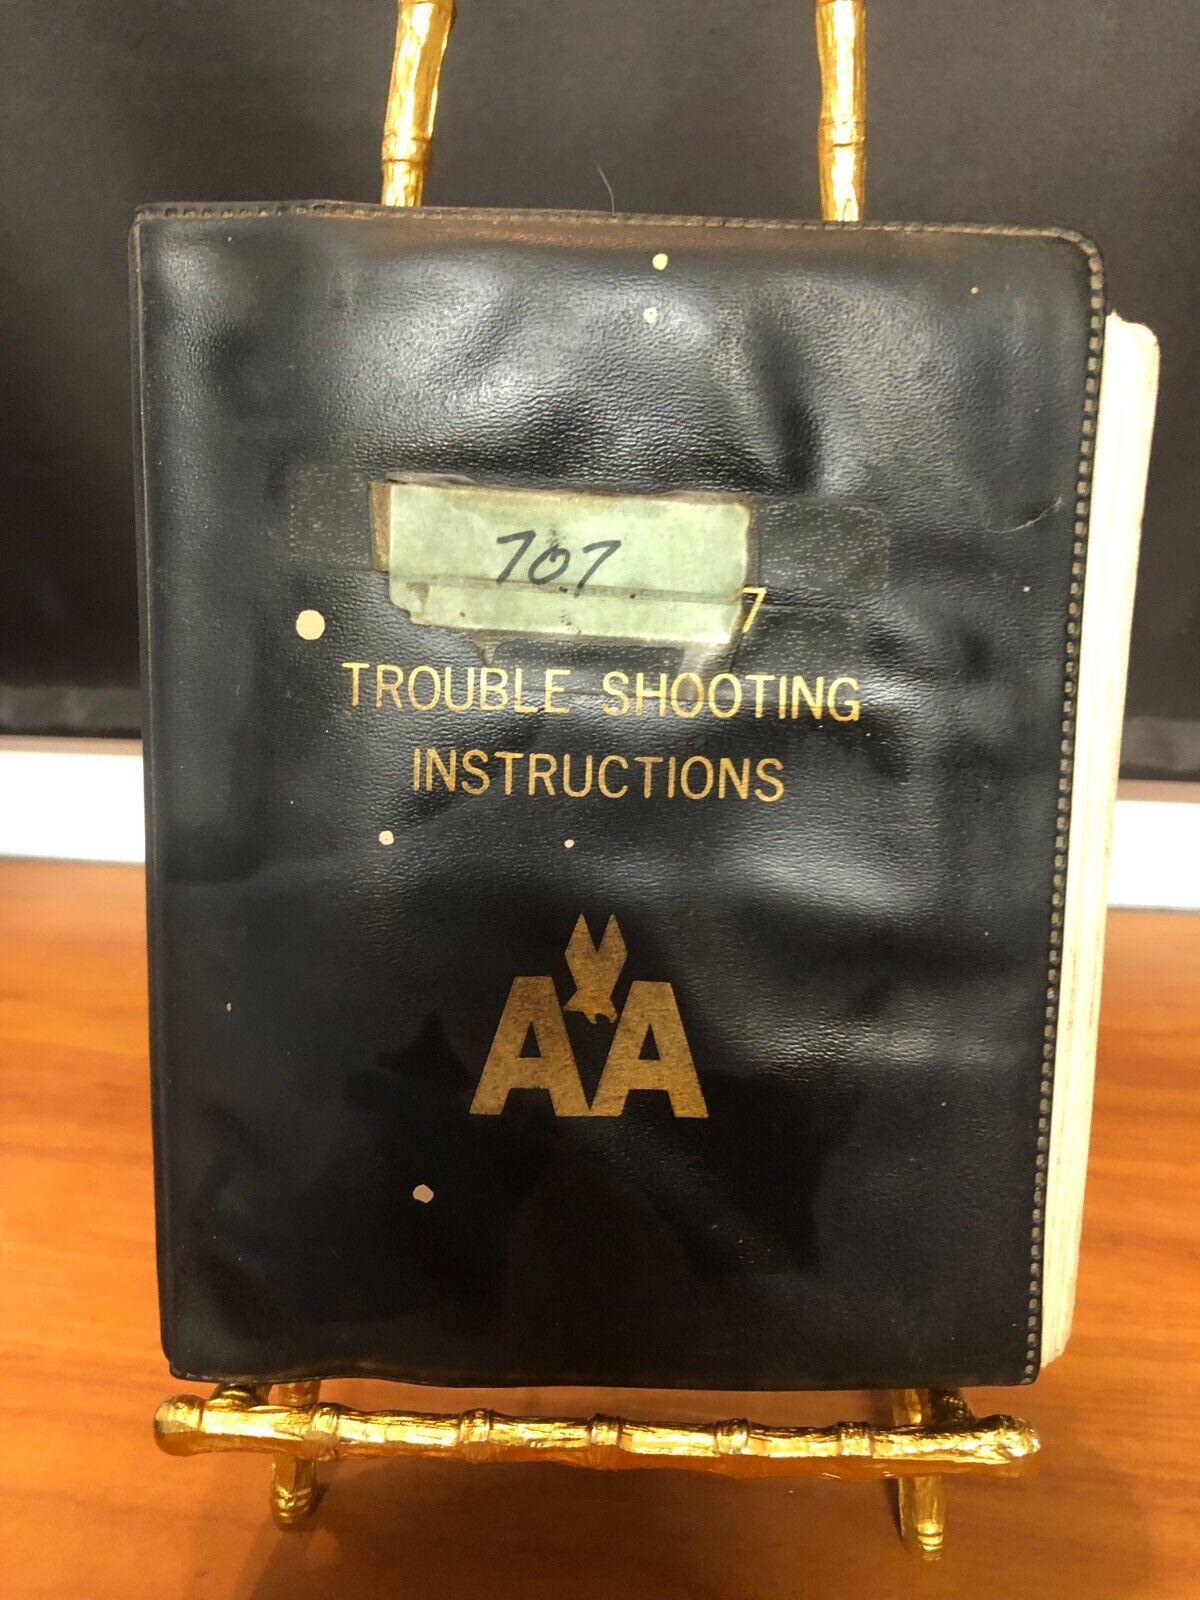 American Airlines Boeing 707 Trouble Shooting Instructions Manual